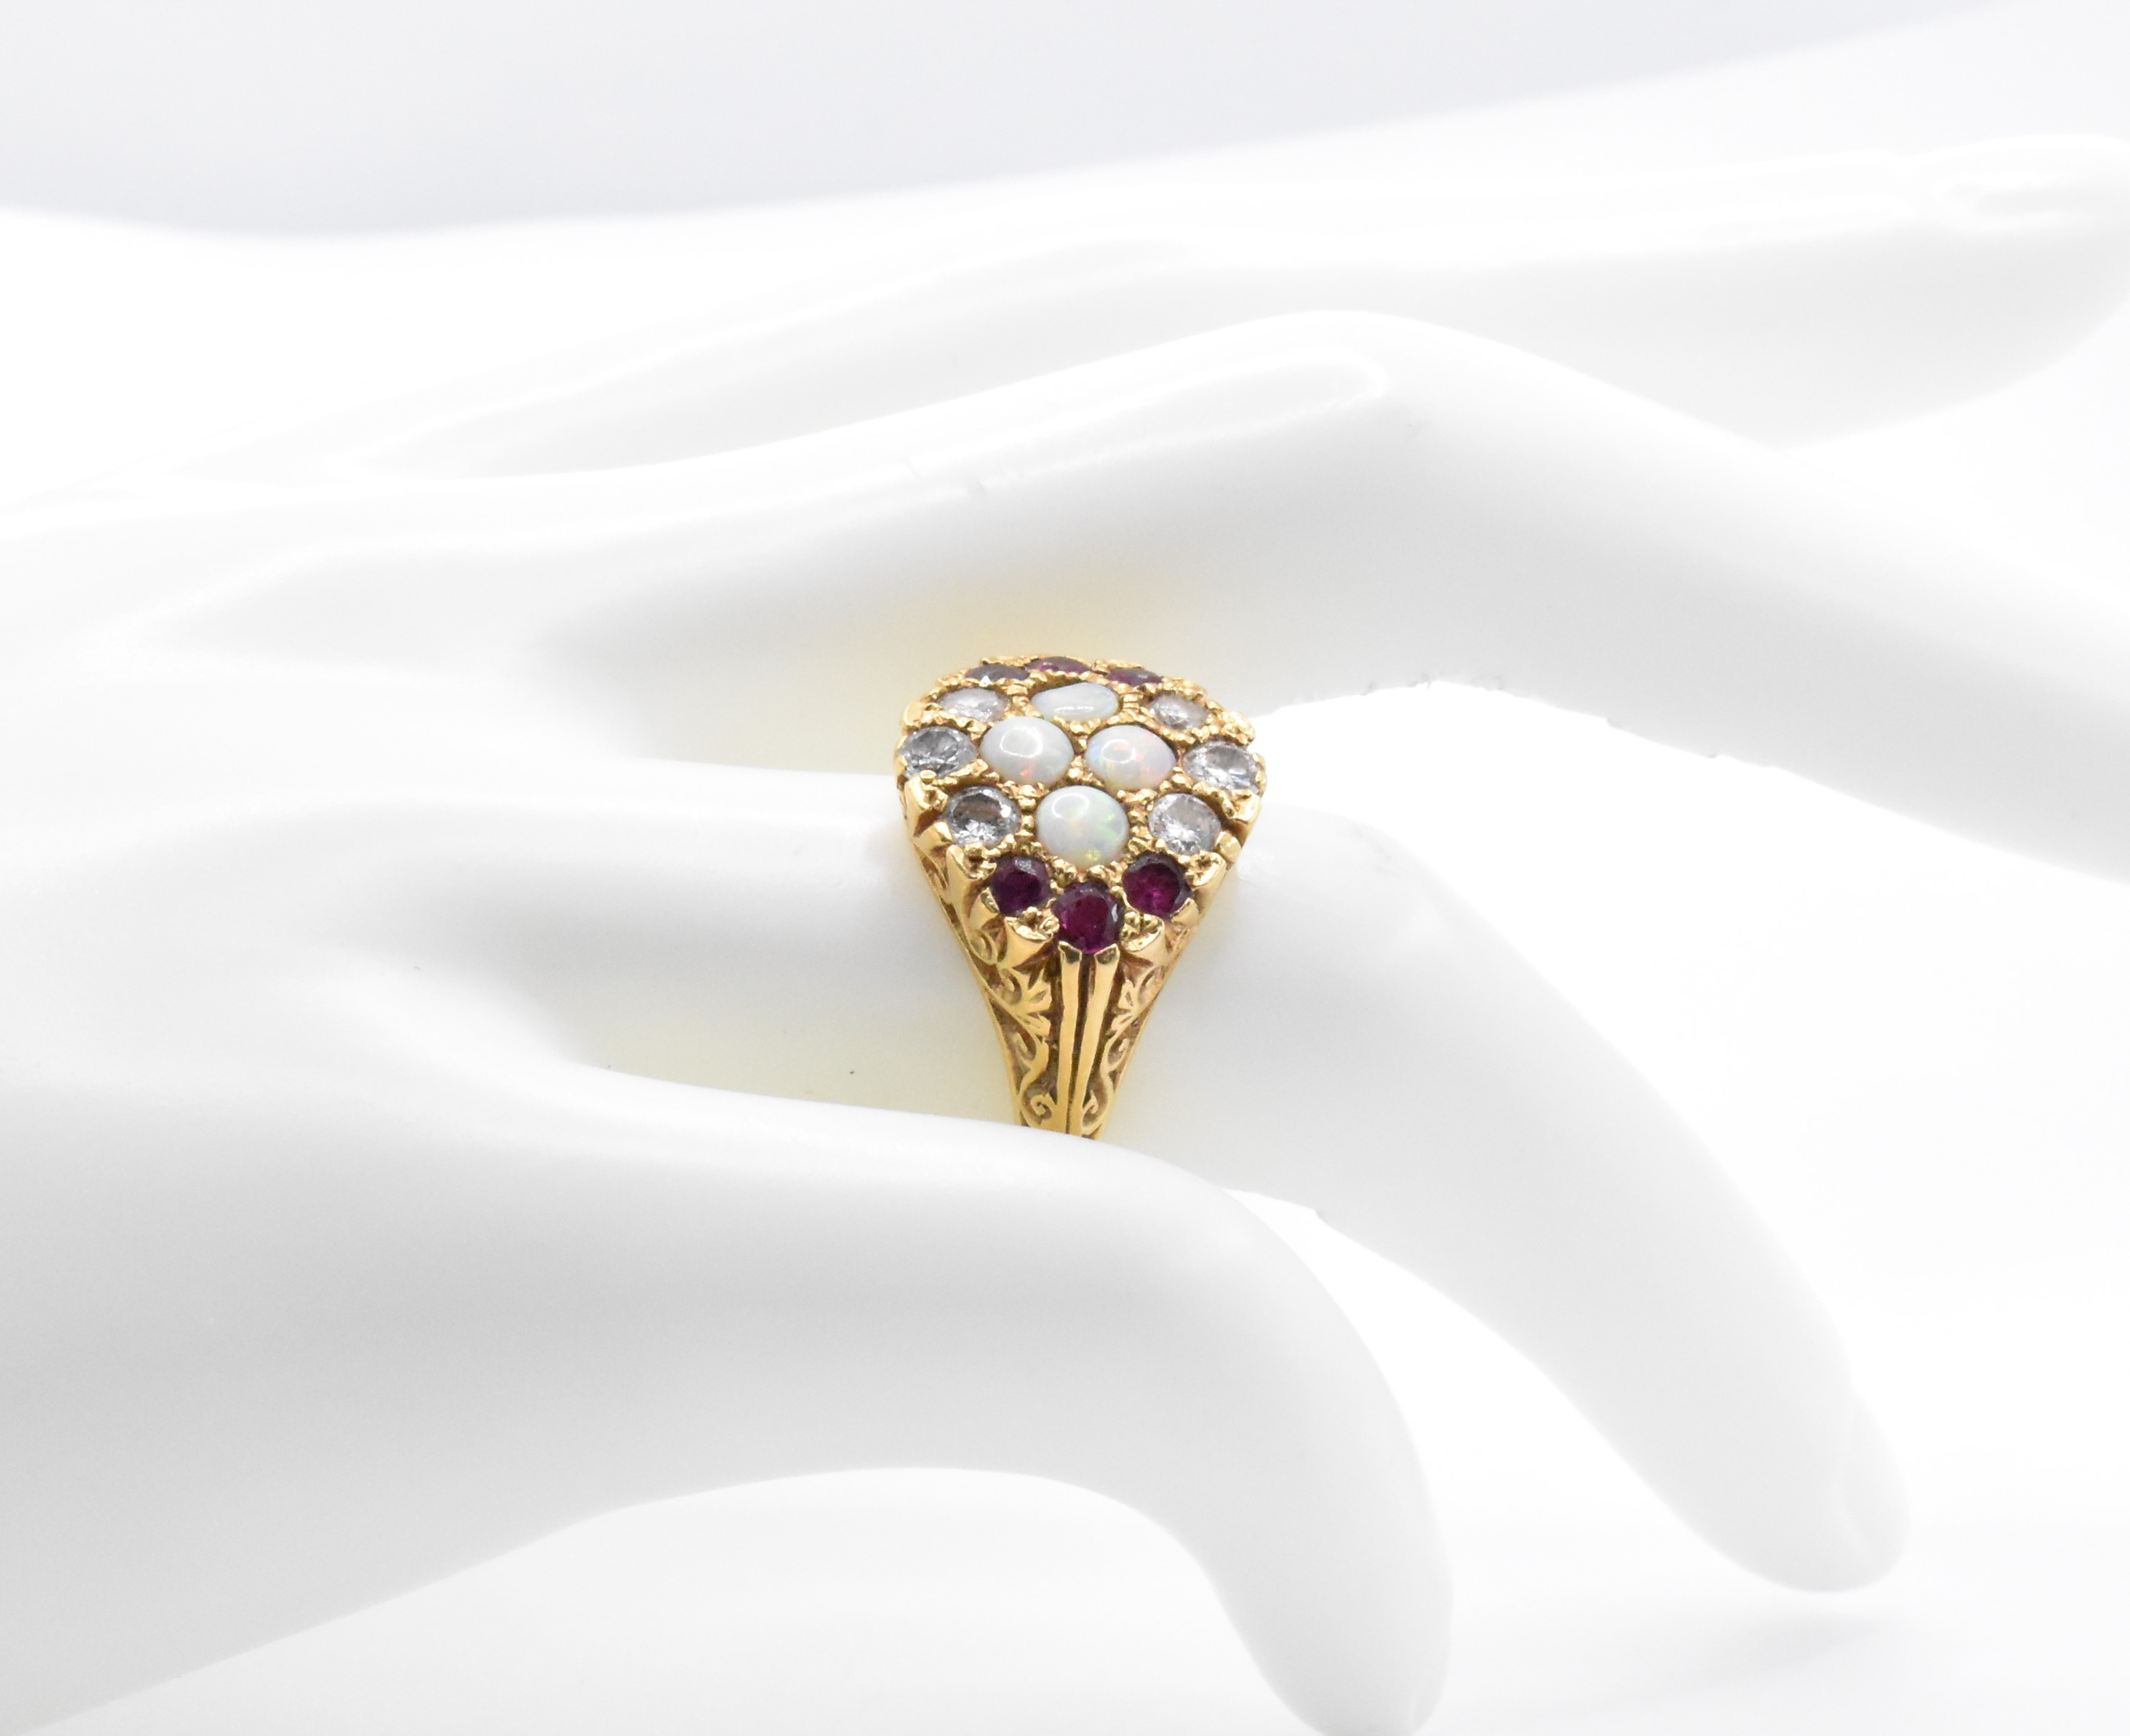 18CT GOLD OPAL DIAMOND & RUBY RING - Image 6 of 7